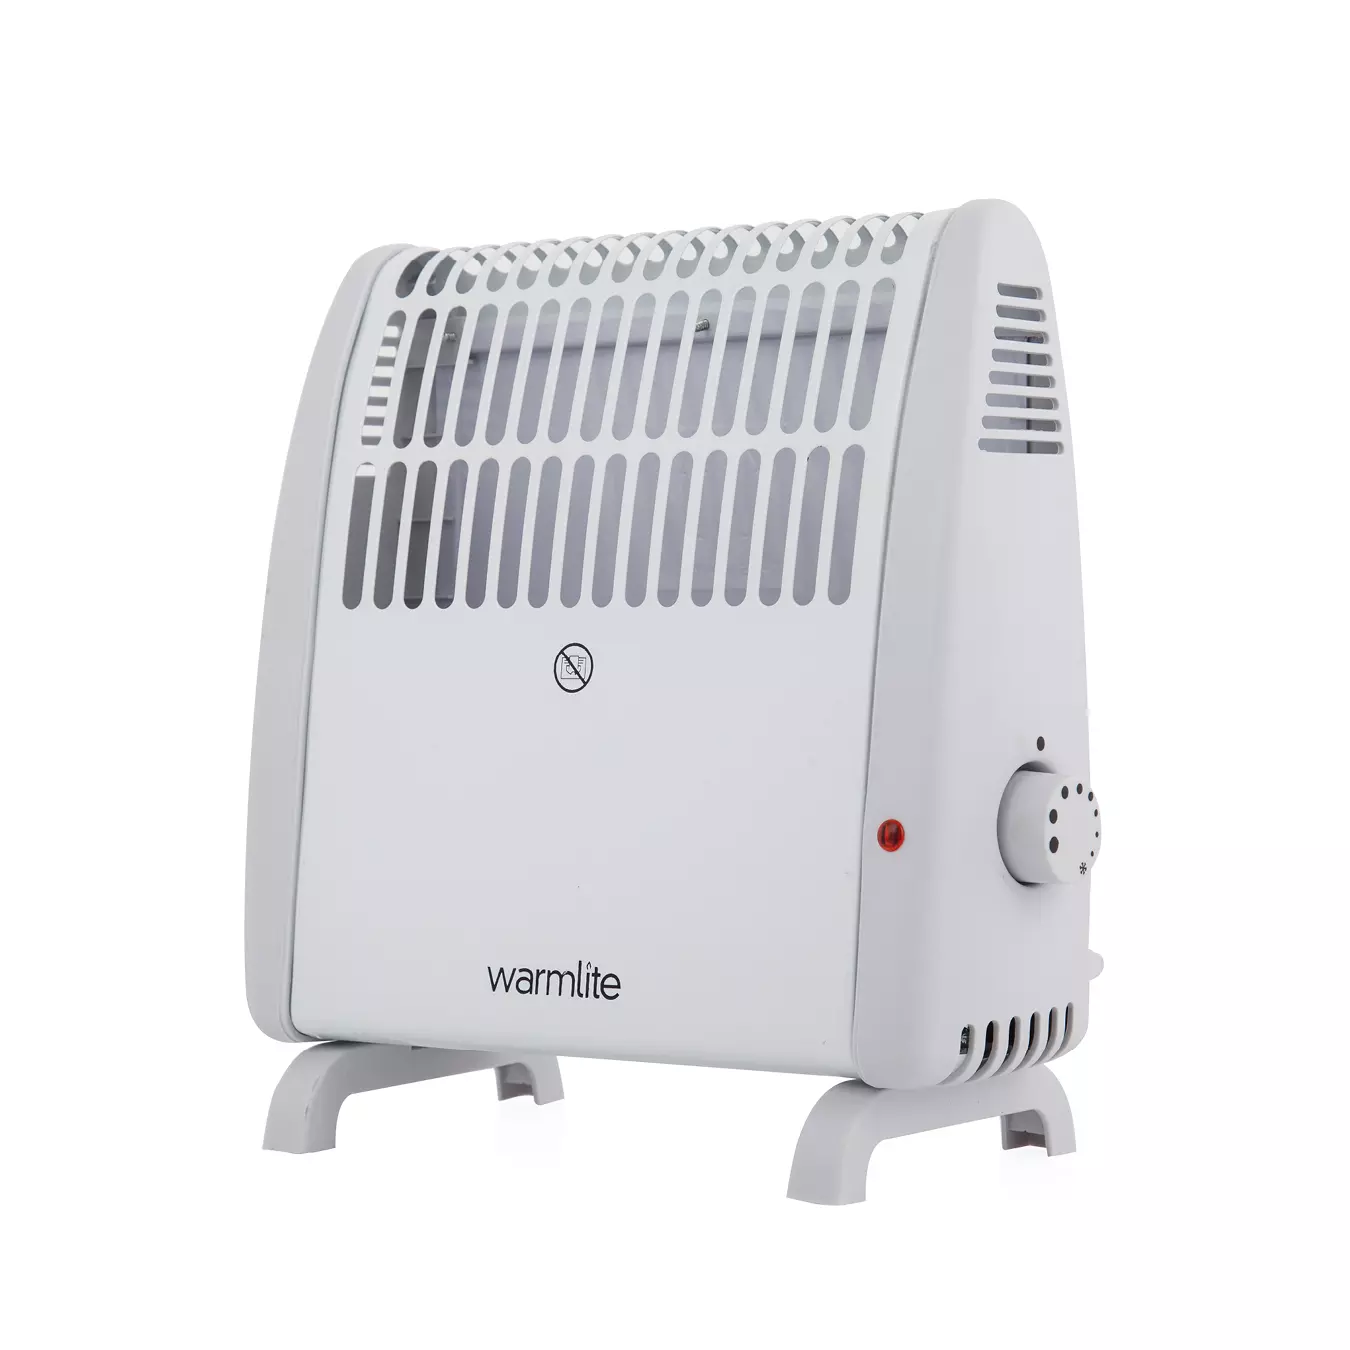 Warmlite Compact Convection Heater, 450W Freestanding or Wall Mountable with Anti-Frost Protection, White